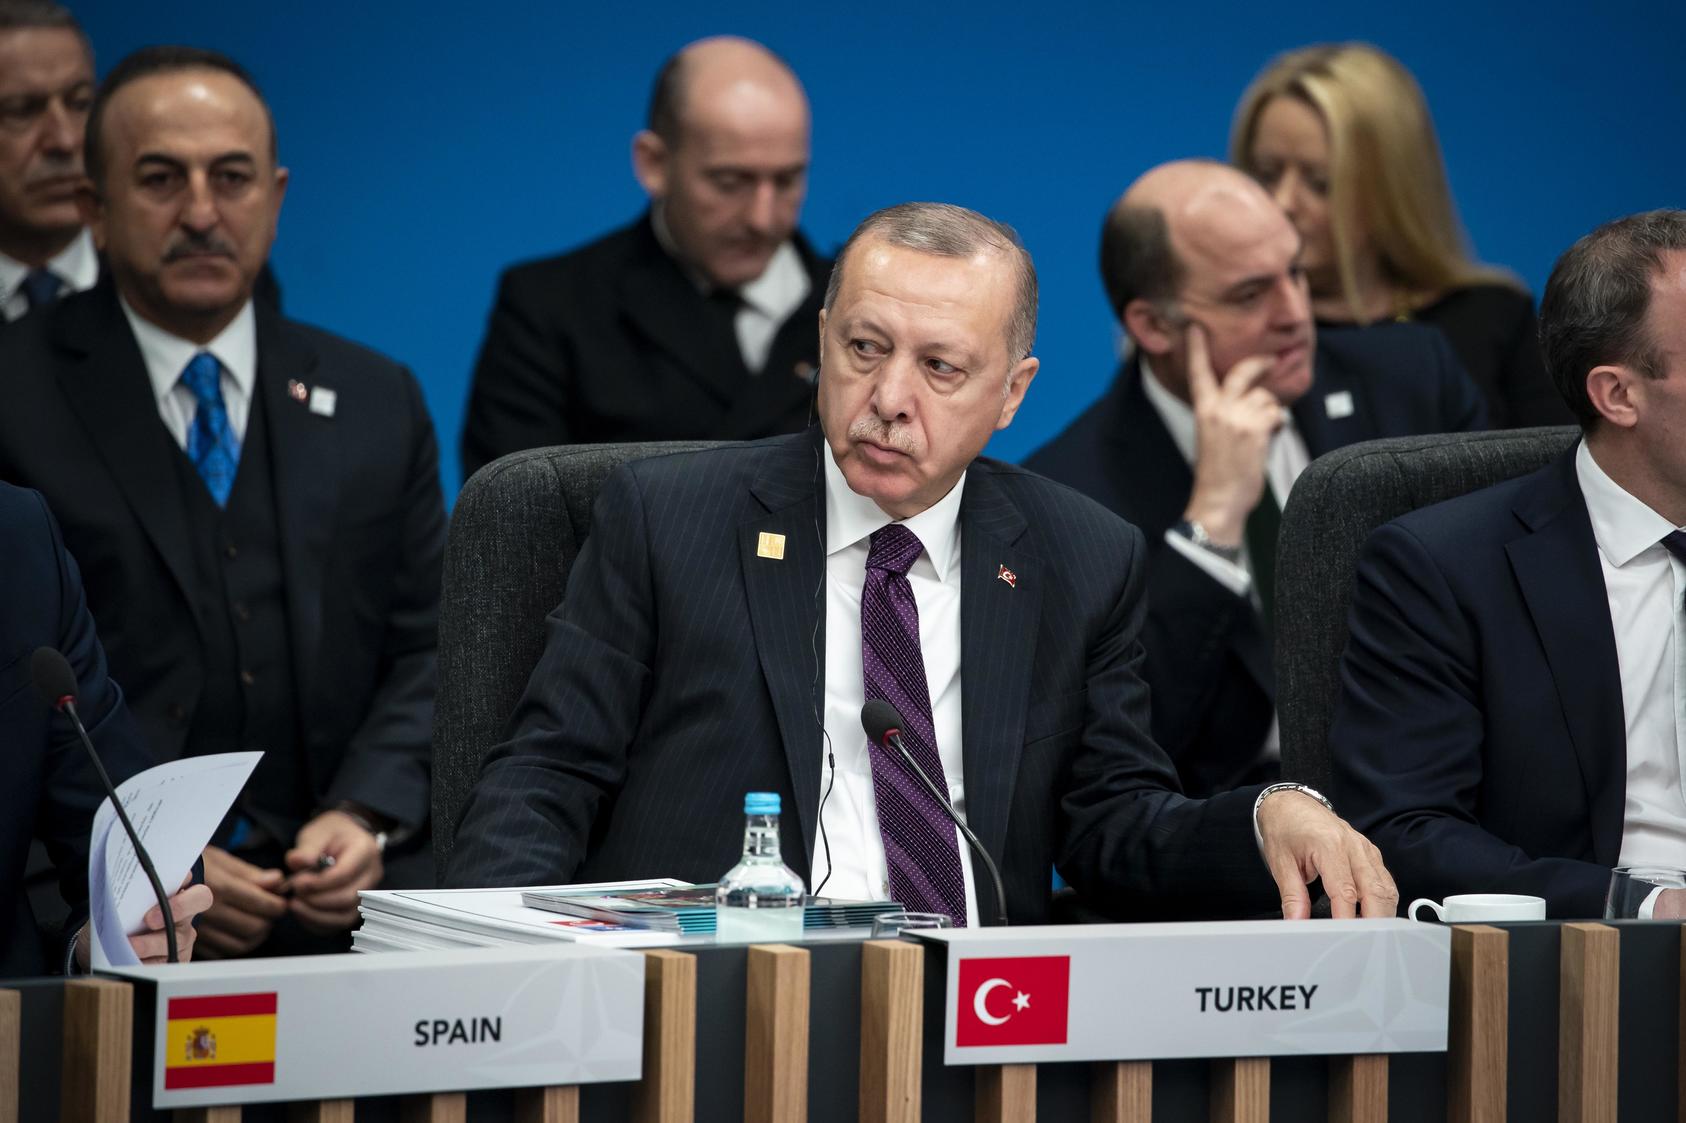 Turkish President Recep Tayyip Erdogan meets other NATO heads of state in 2020. Erdogan has maintained a rapport and communications with Russia’s President Vladimir Putin even while helping Ukraine against Russia’s invasion. (Al Drago/The New York Times)